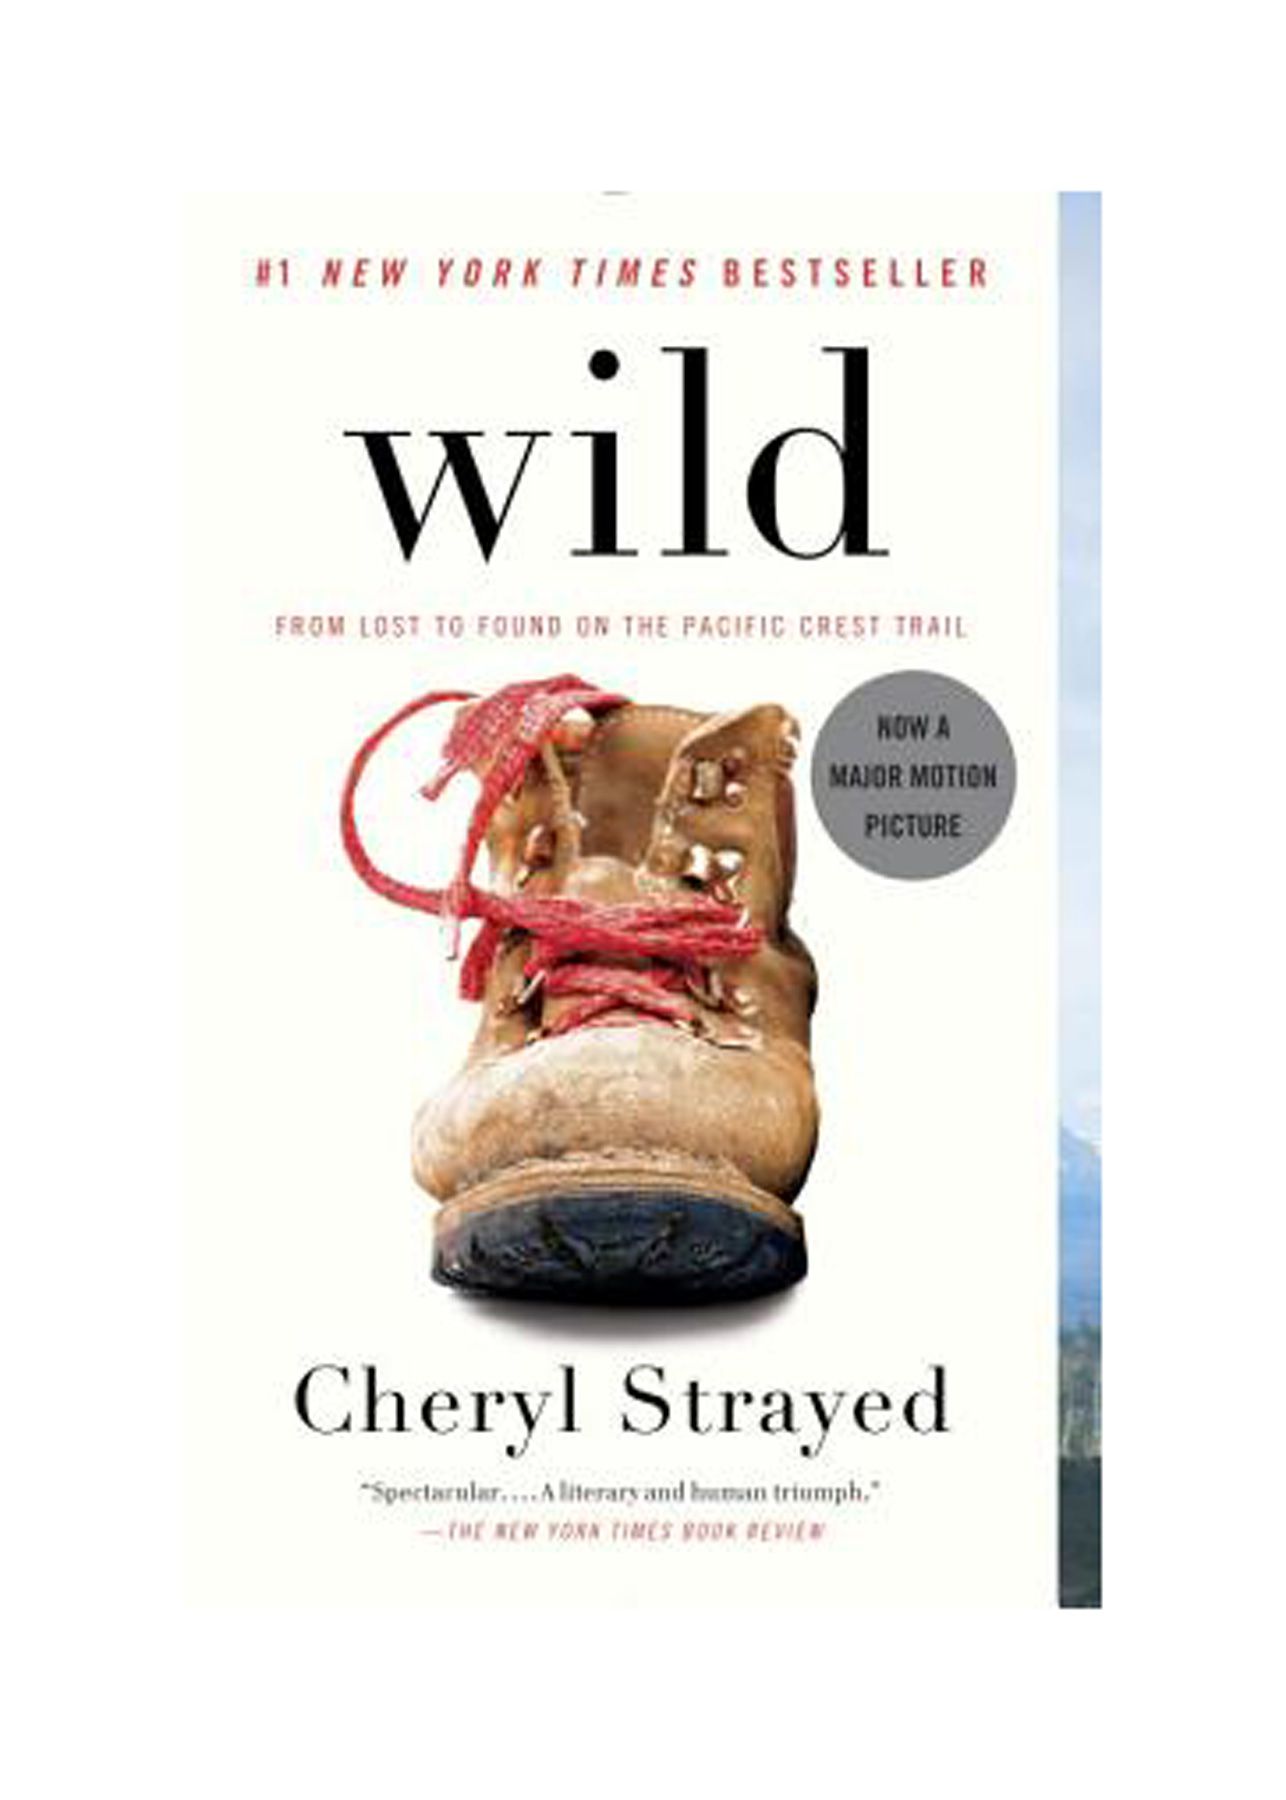 Good Books to Read in Your 20s: ‘Wild: From Lost to Found on the Pacific Crest Trail’ by Cheryl Strayed